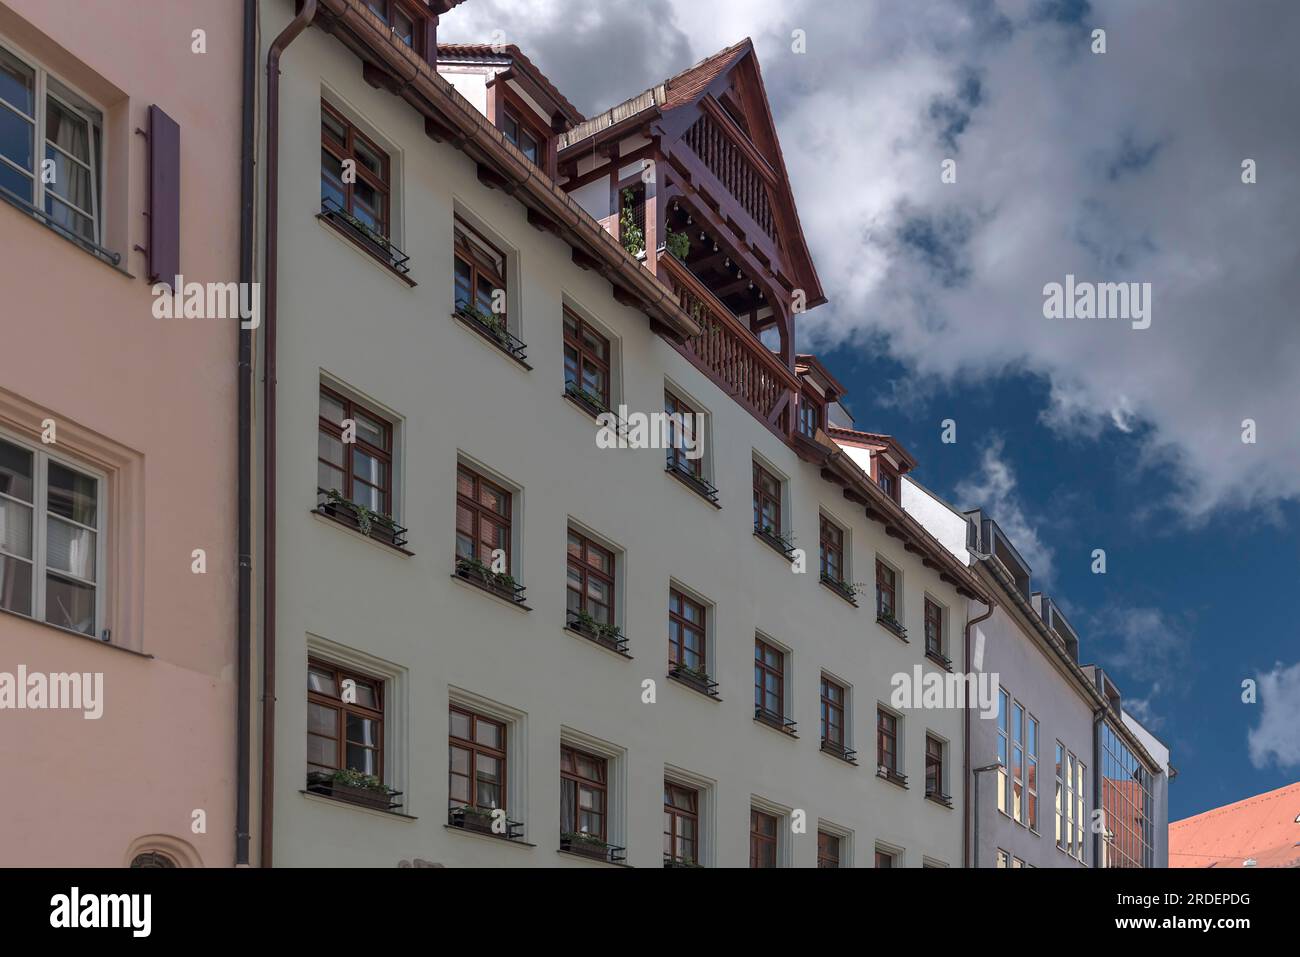 Historic residential and commercial building with dormer window, Hintere Ledergasse 43, Nuremberg, Middle Franconia, Bavaria, Germany Stock Photo